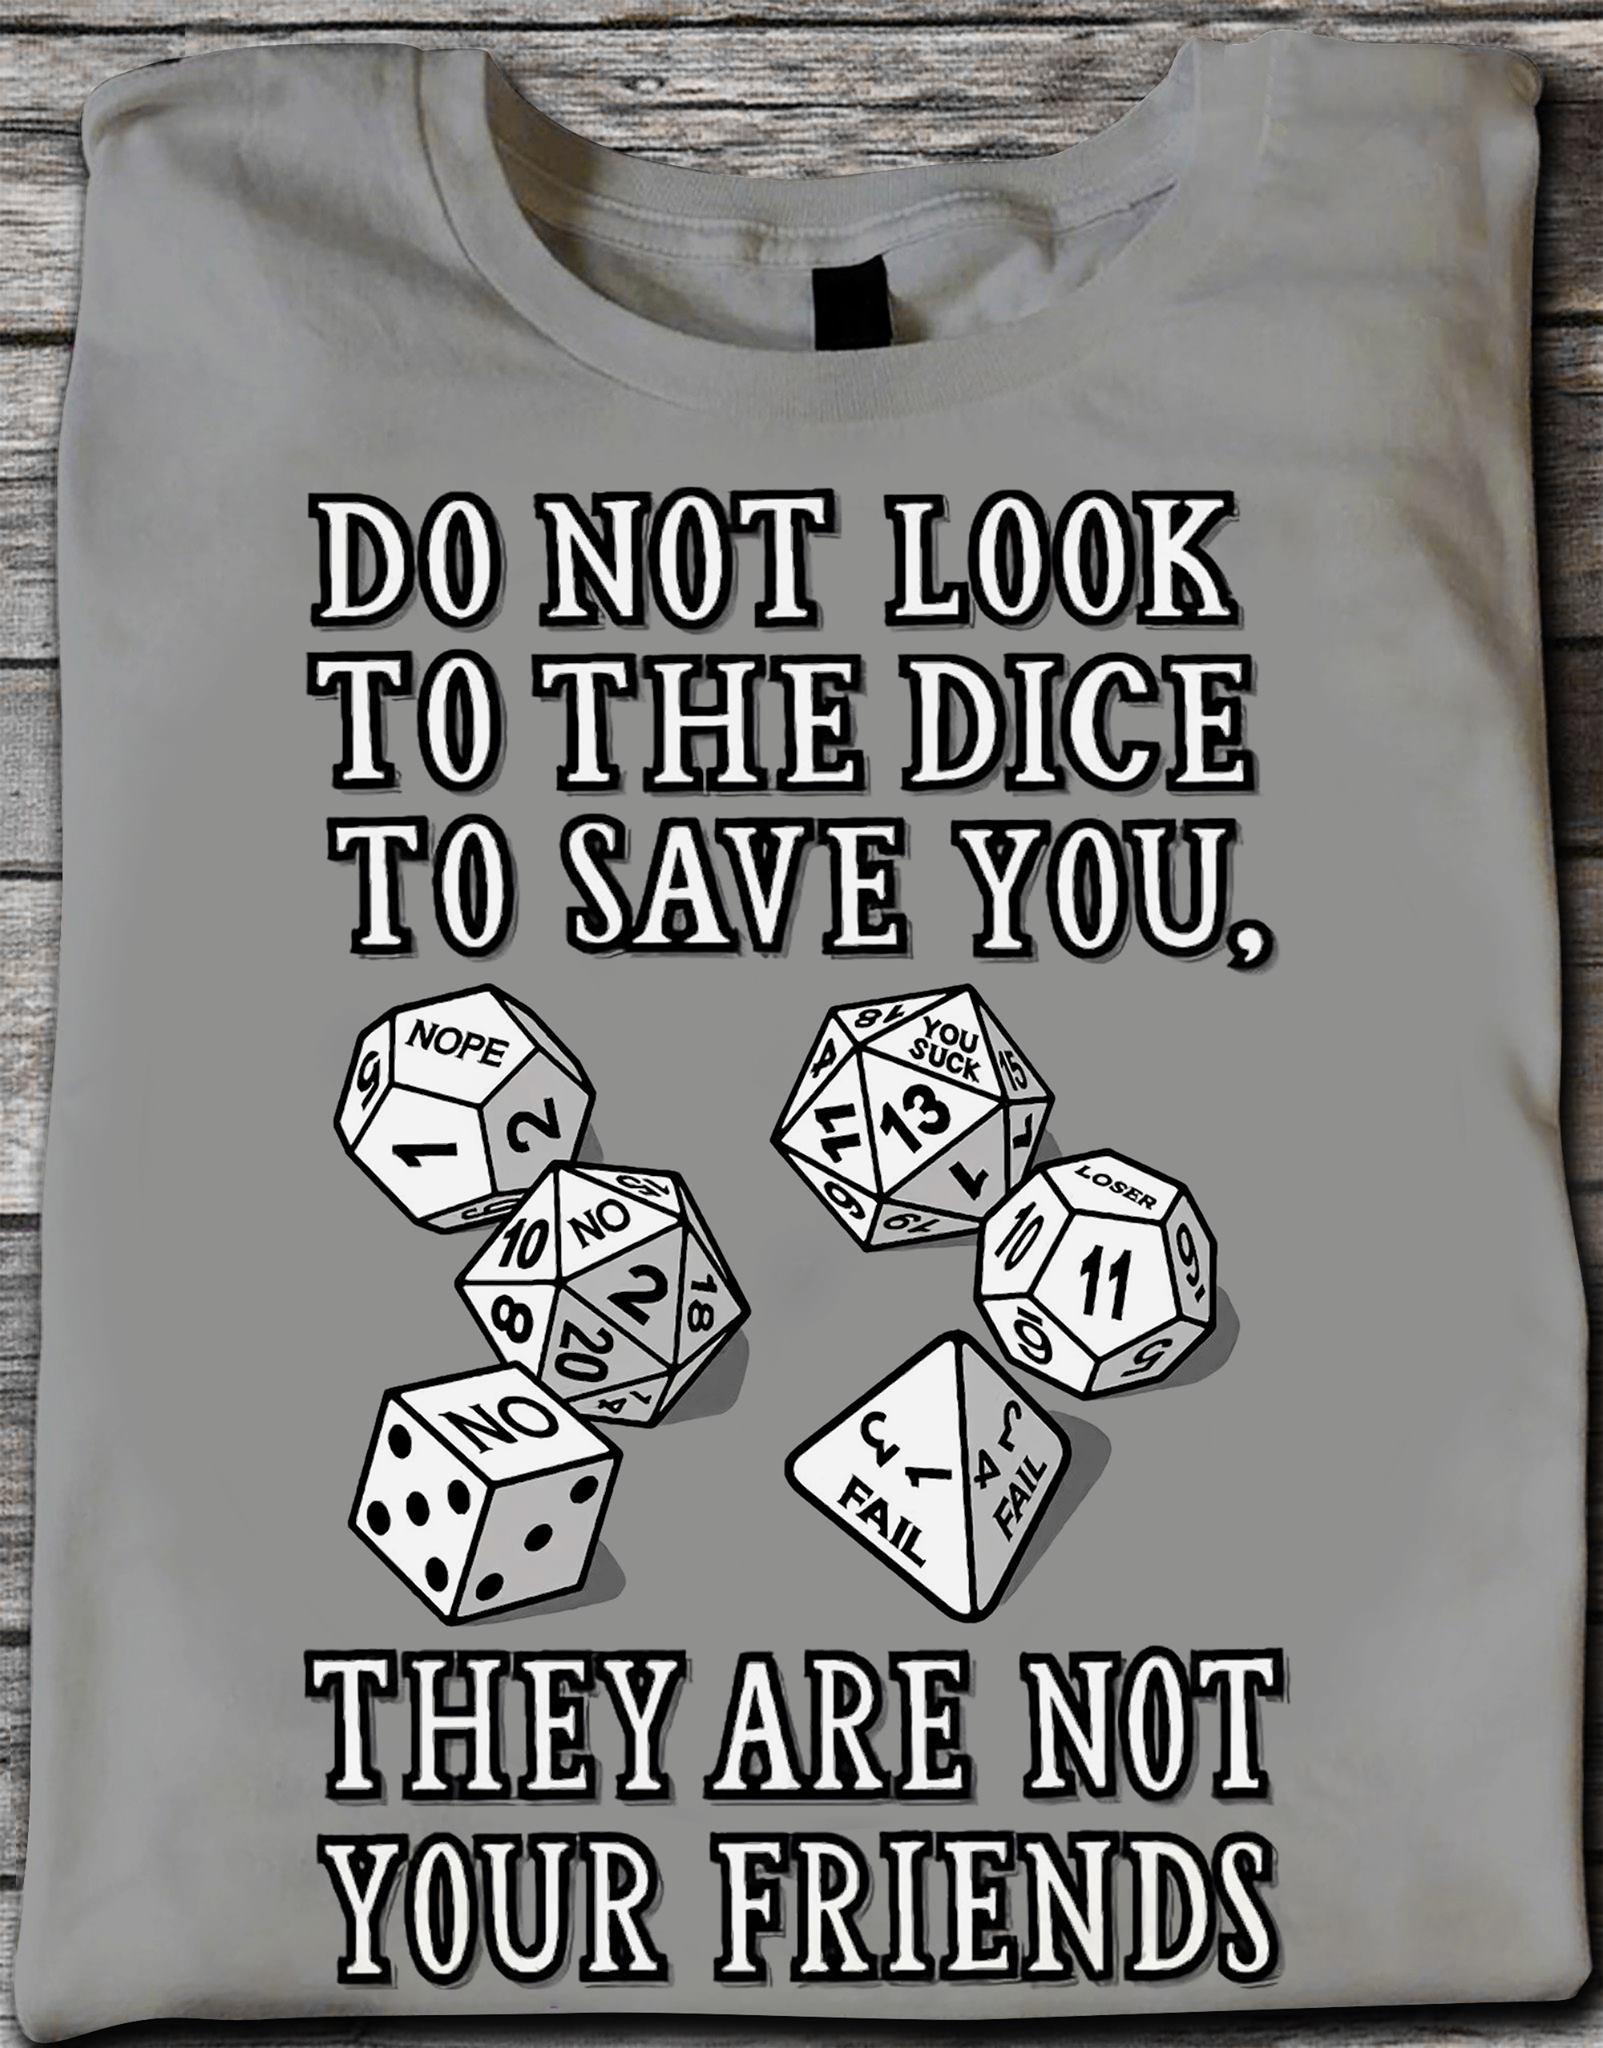 The Dice D&D Game - Do not look to the dice to save you they are not your friends